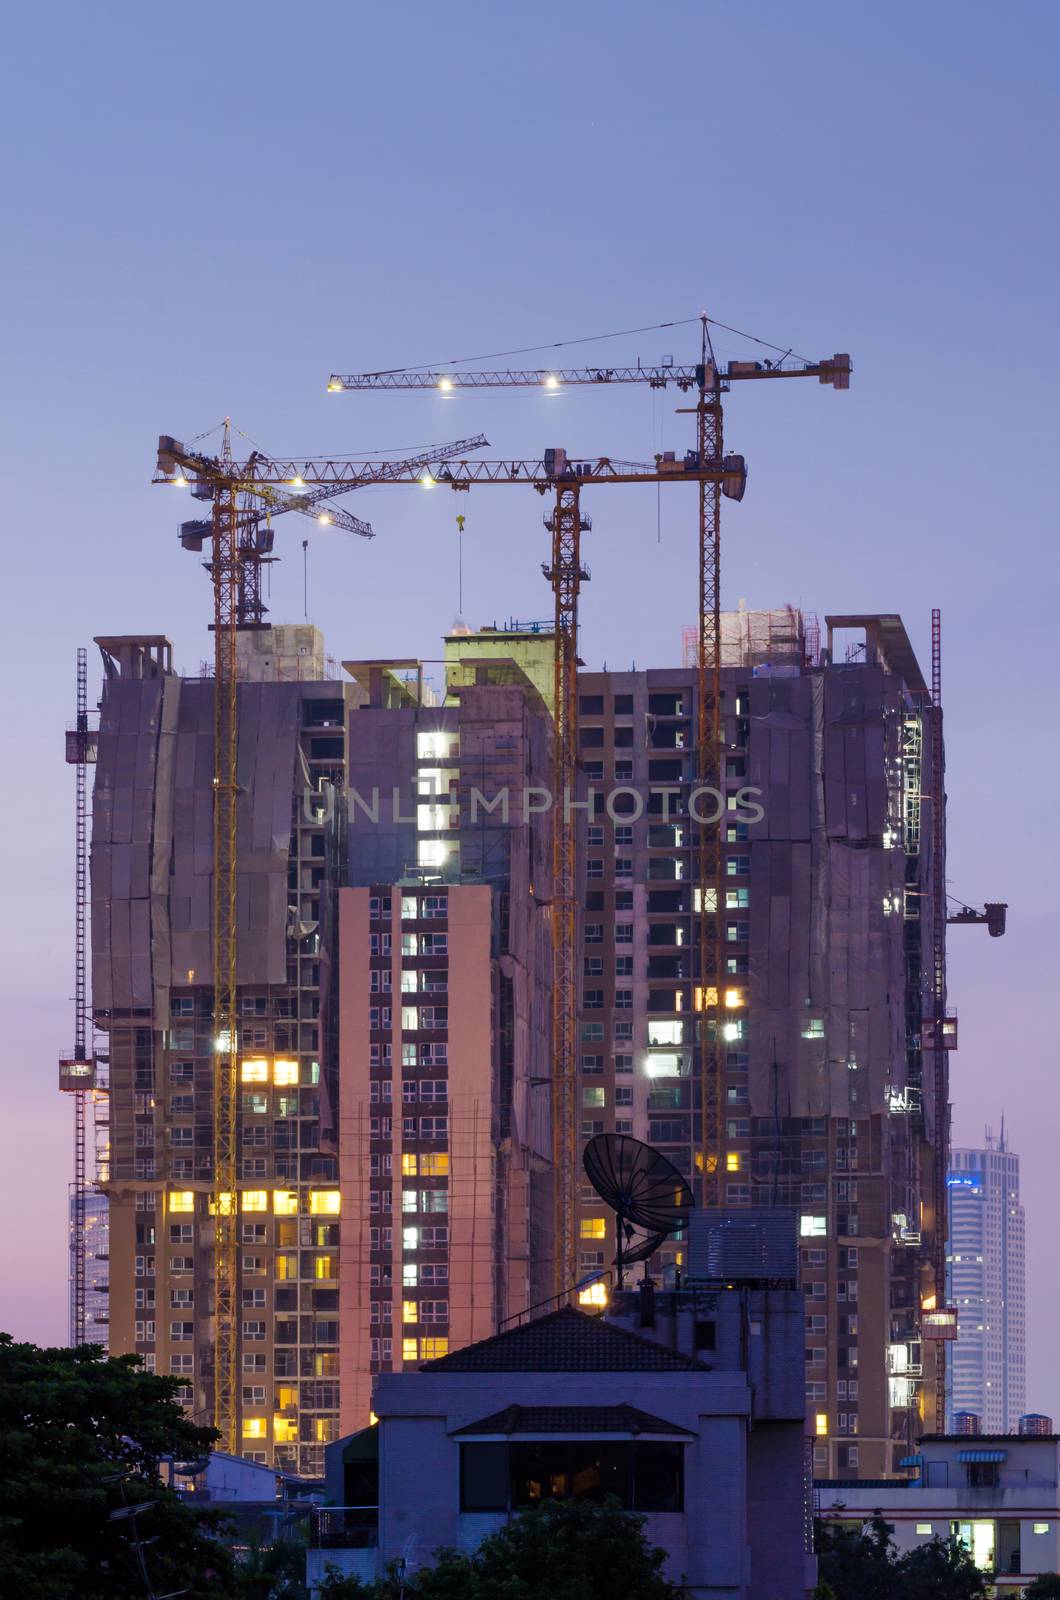 Building Under Construction, Twilight time by siraanamwong